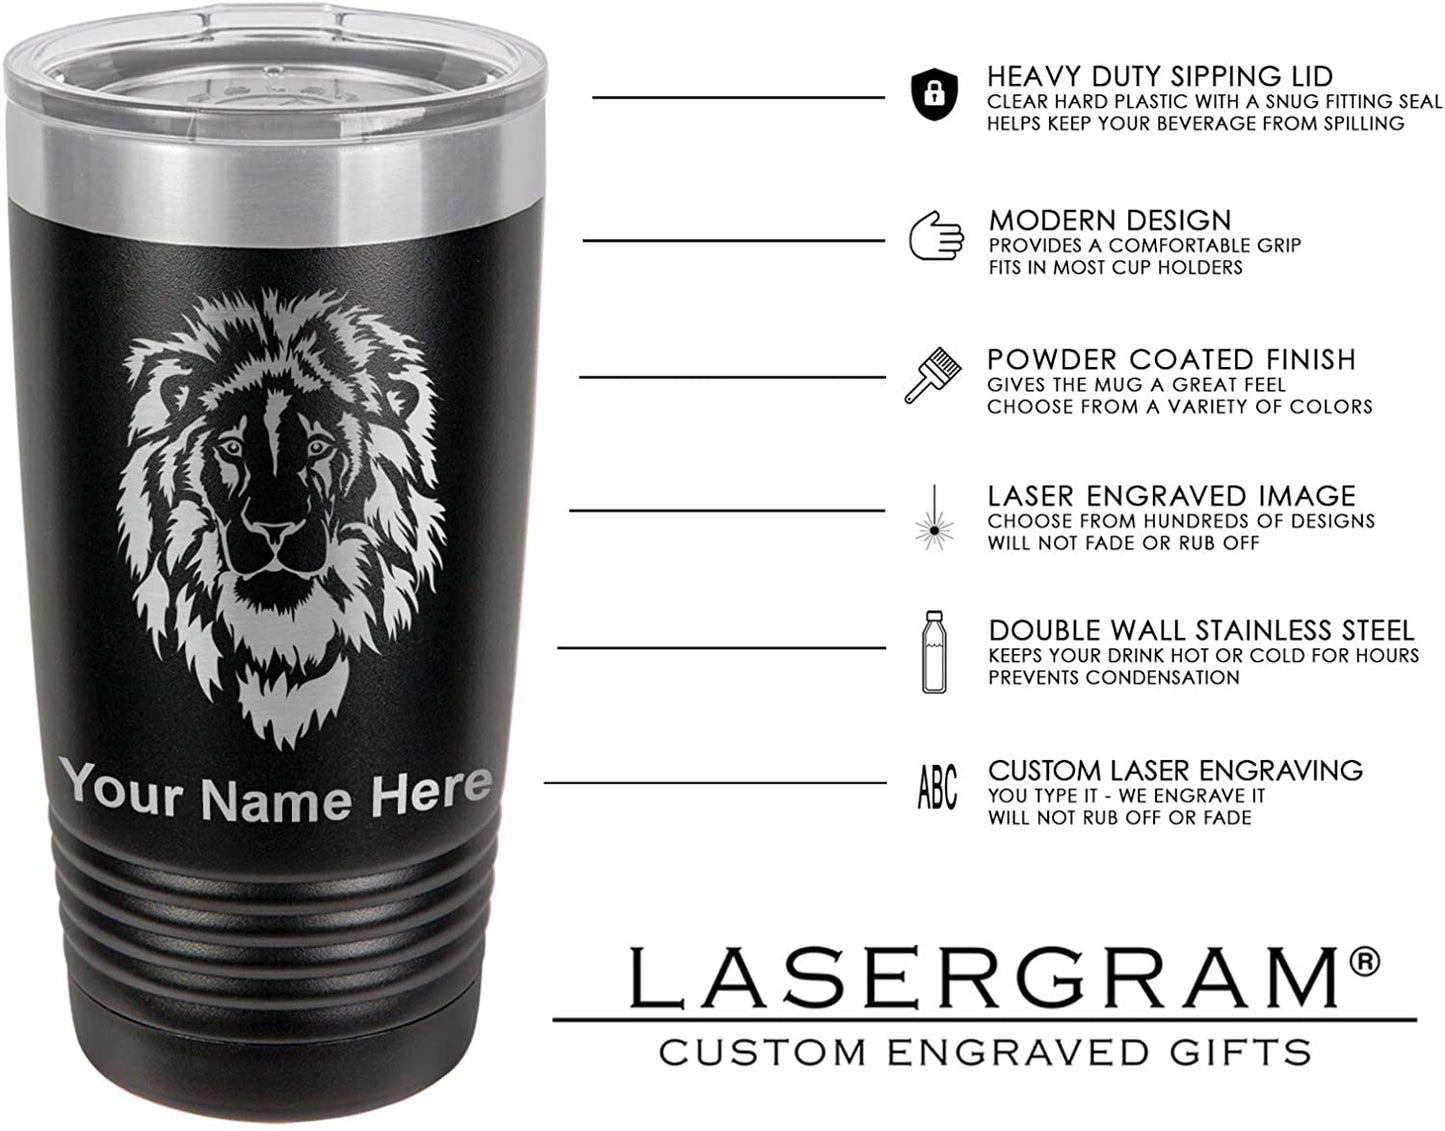 20oz Vacuum Insulated Tumbler Mug, World's Greatest Uncle, Personalized Engraving Included